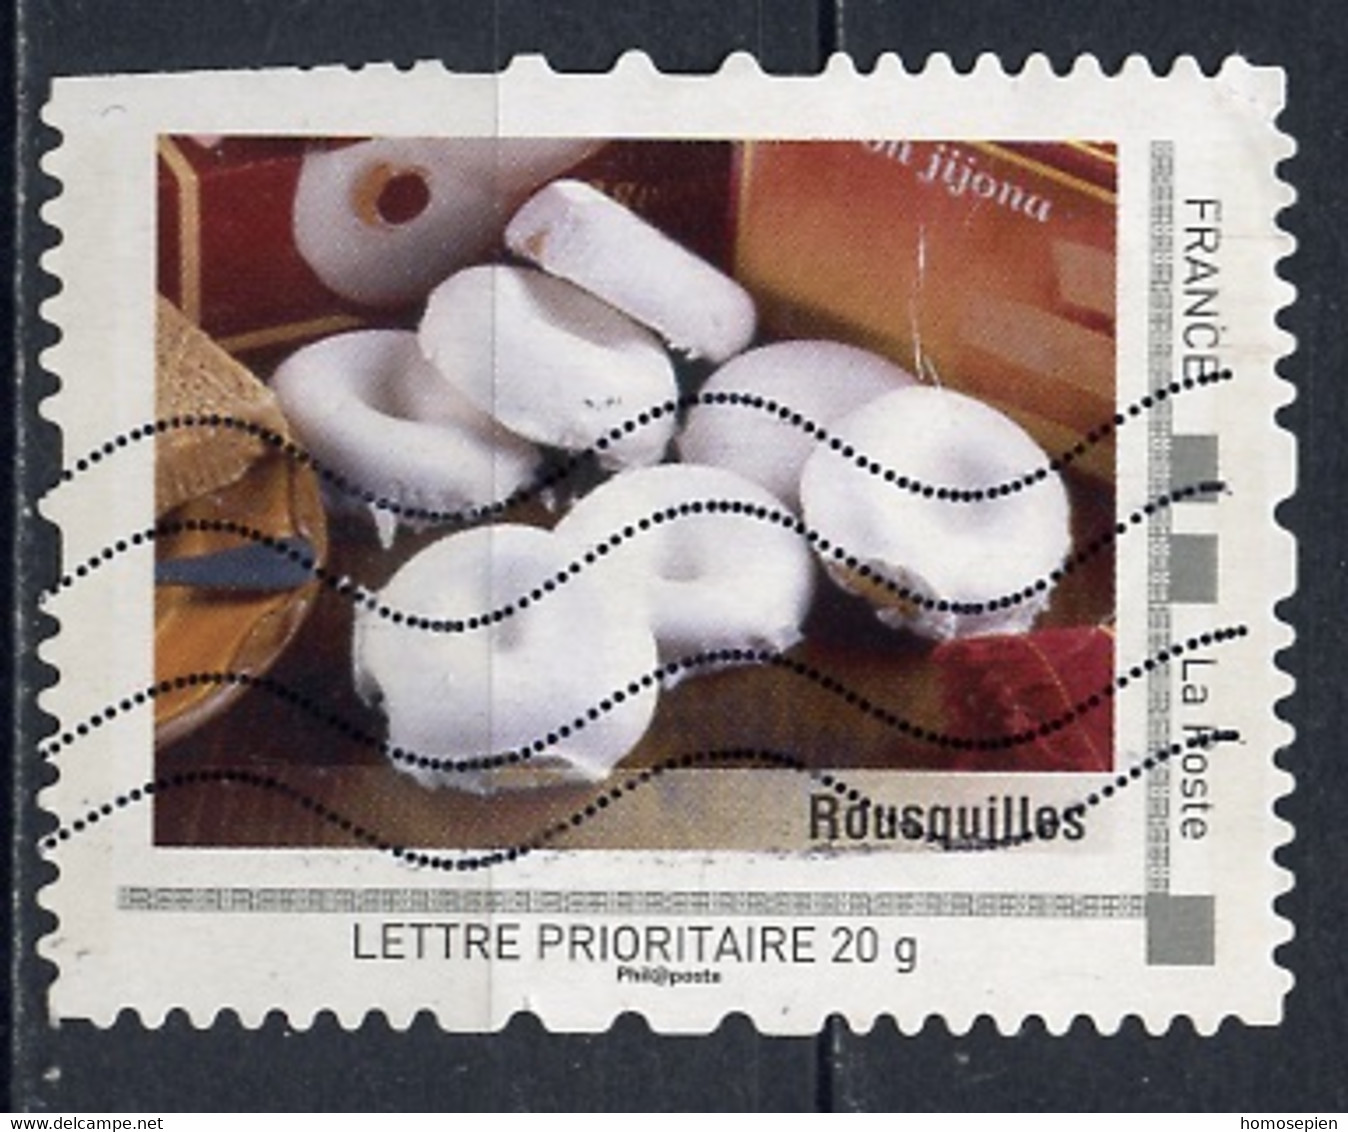 France - Frankreich Timbre Personnalisé 2007 Y&T N°MTAM01-005 - Michel N°BS(?) (o)  -rousquilles - Used Stamps